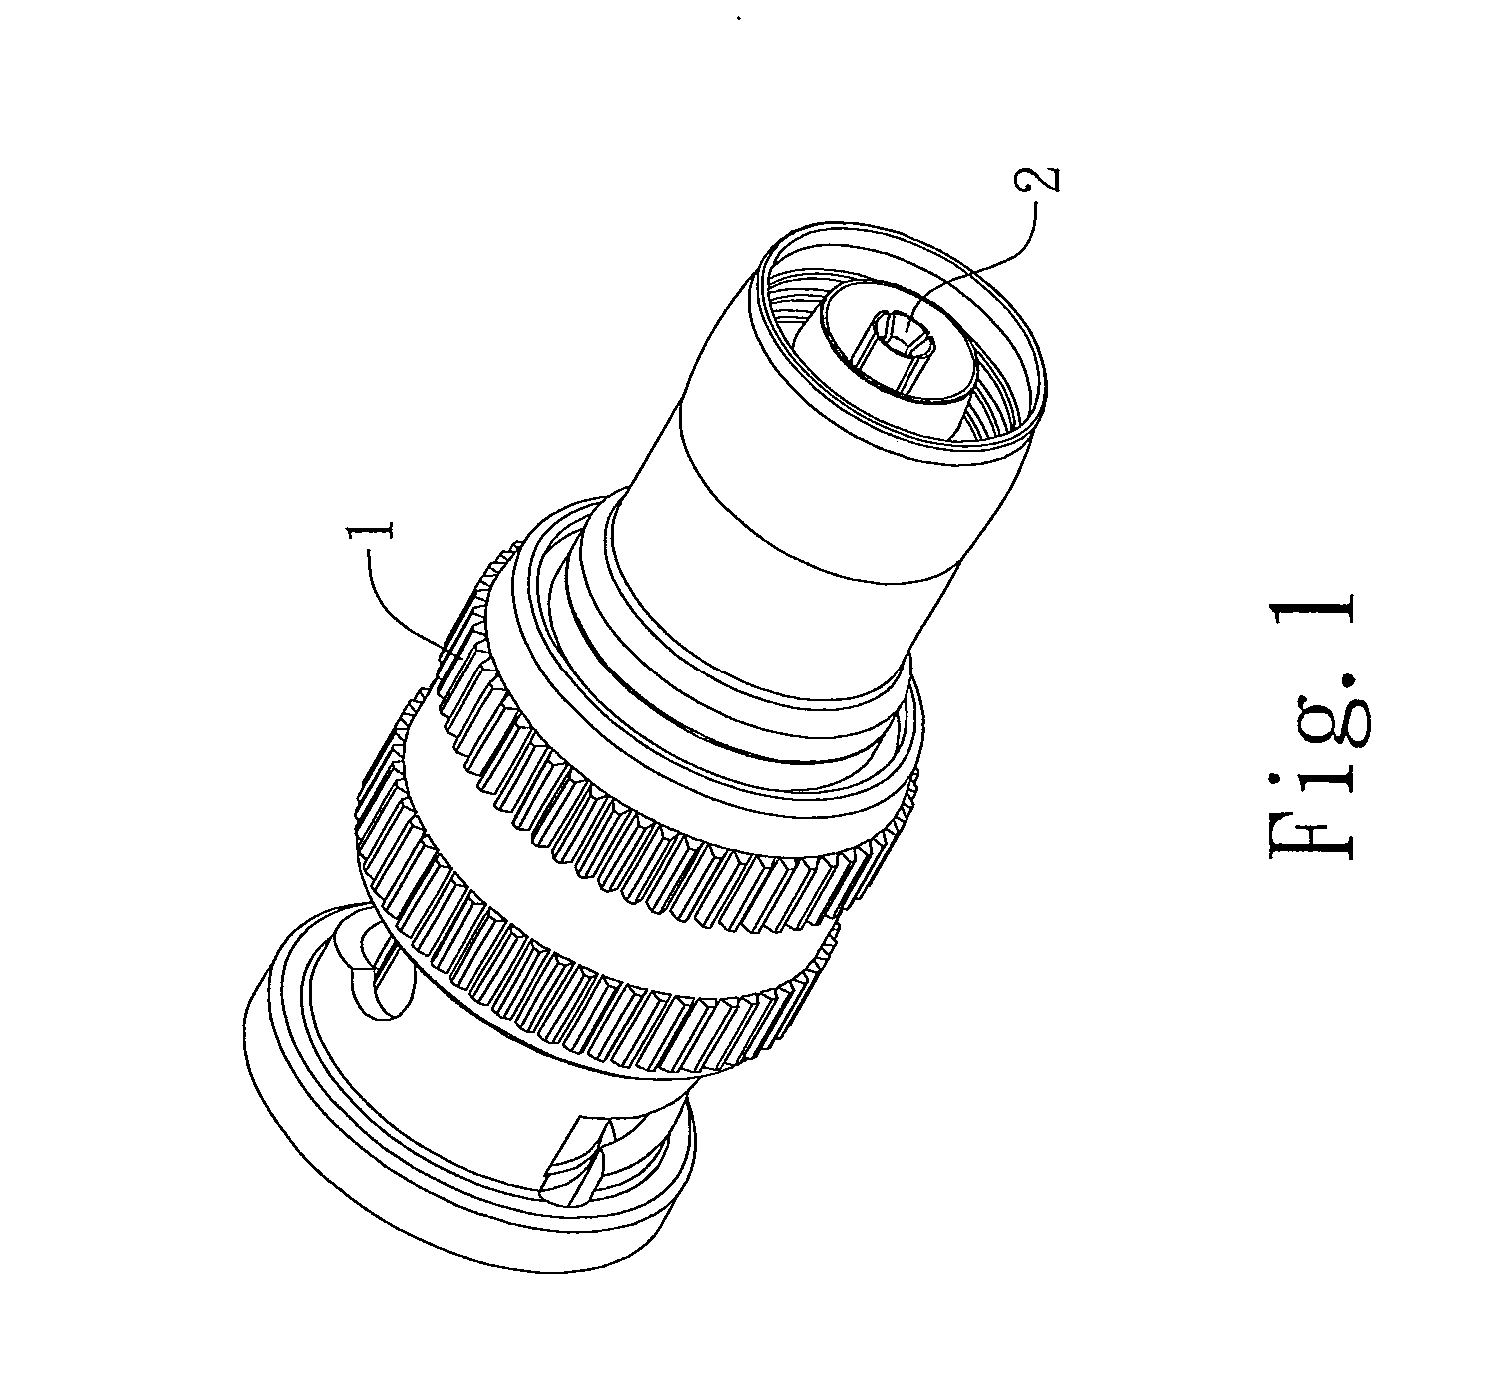 Connector structure for high-frequency transmission lines